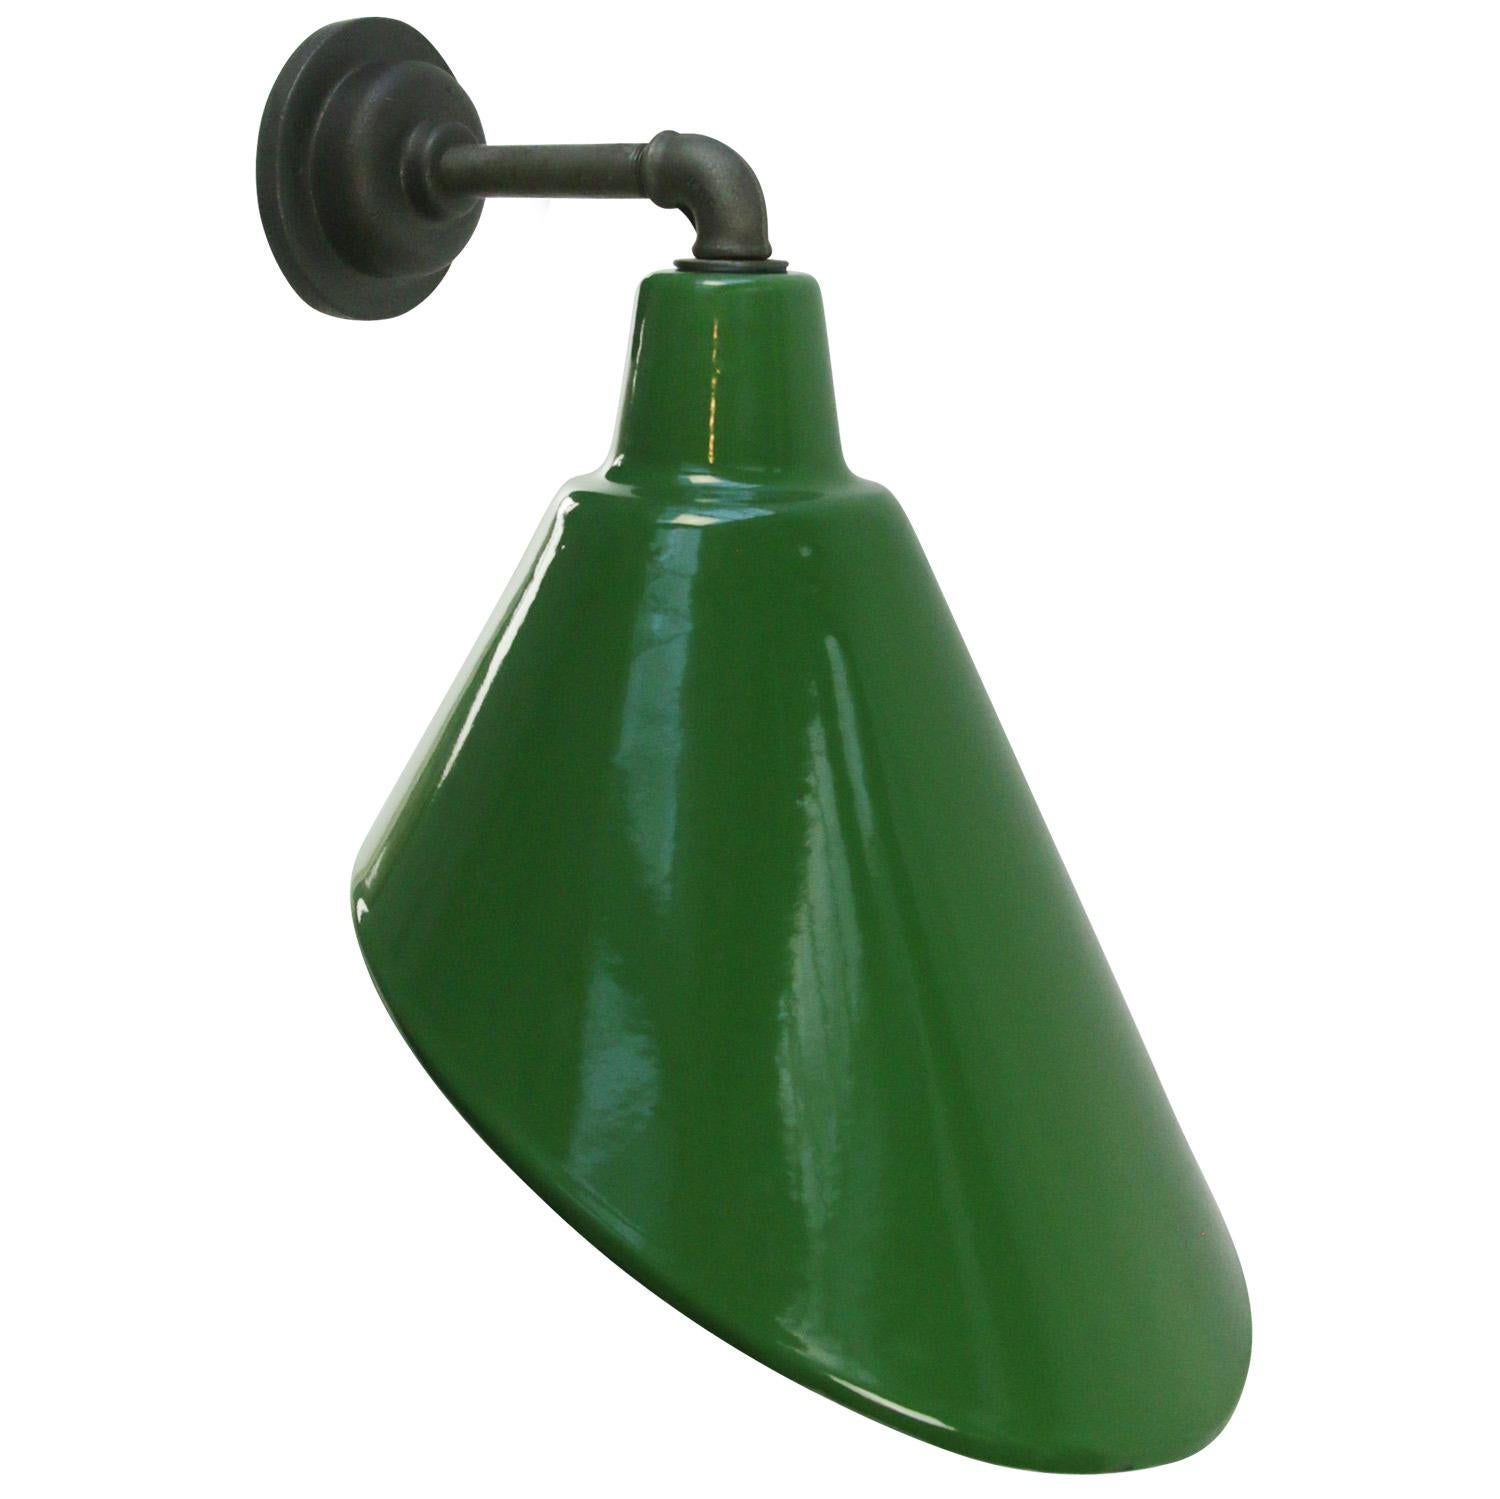 Factory wall light
Green enamel, white interior

Diameter cast iron wall piece:  10.5 cm / 4”.
2 holes to secure

Weight: 2.00 kg / 4.4 lb

Priced per individual item. All lamps have been made suitable by international standards for incandescent